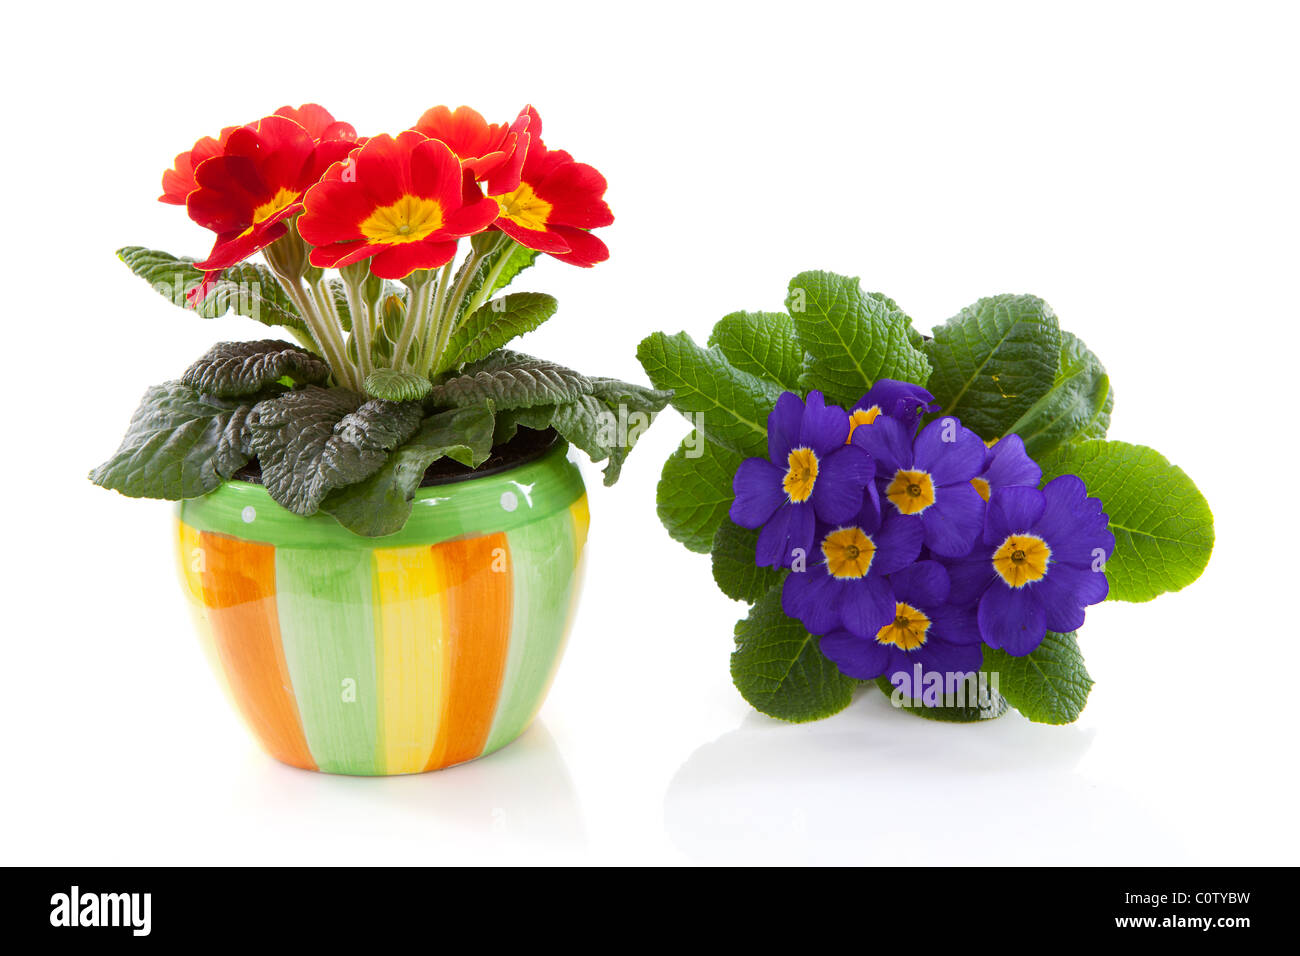 red and purple primula flower in colorful pot over white background Stock Photo